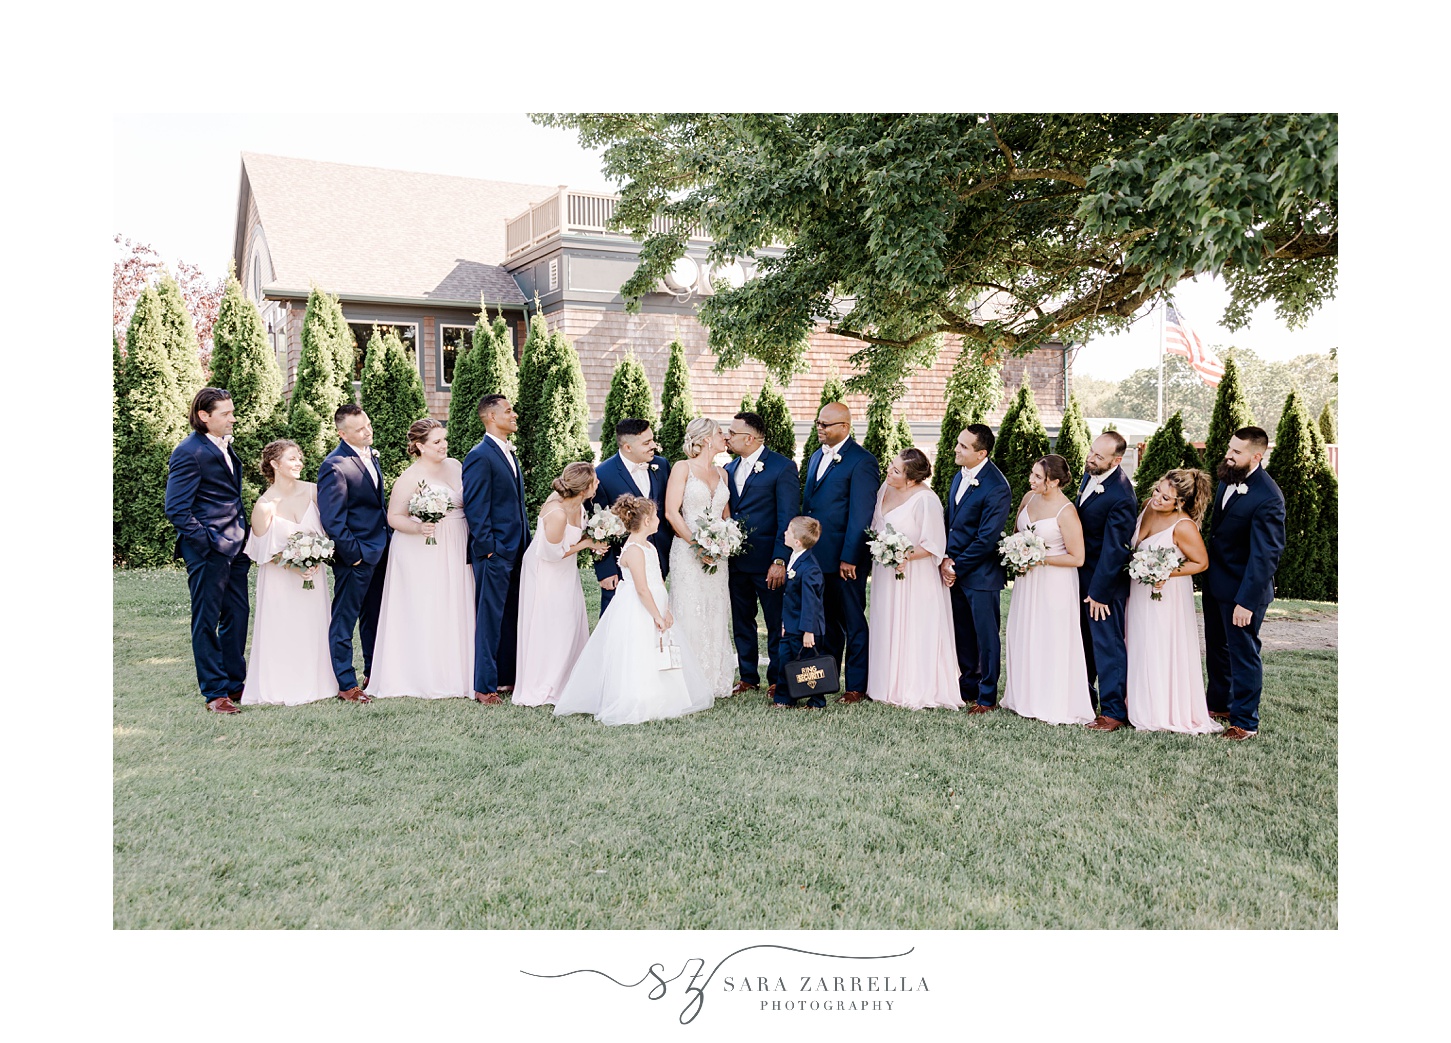 bride and groom stand together with wedding party in navy and pink attire